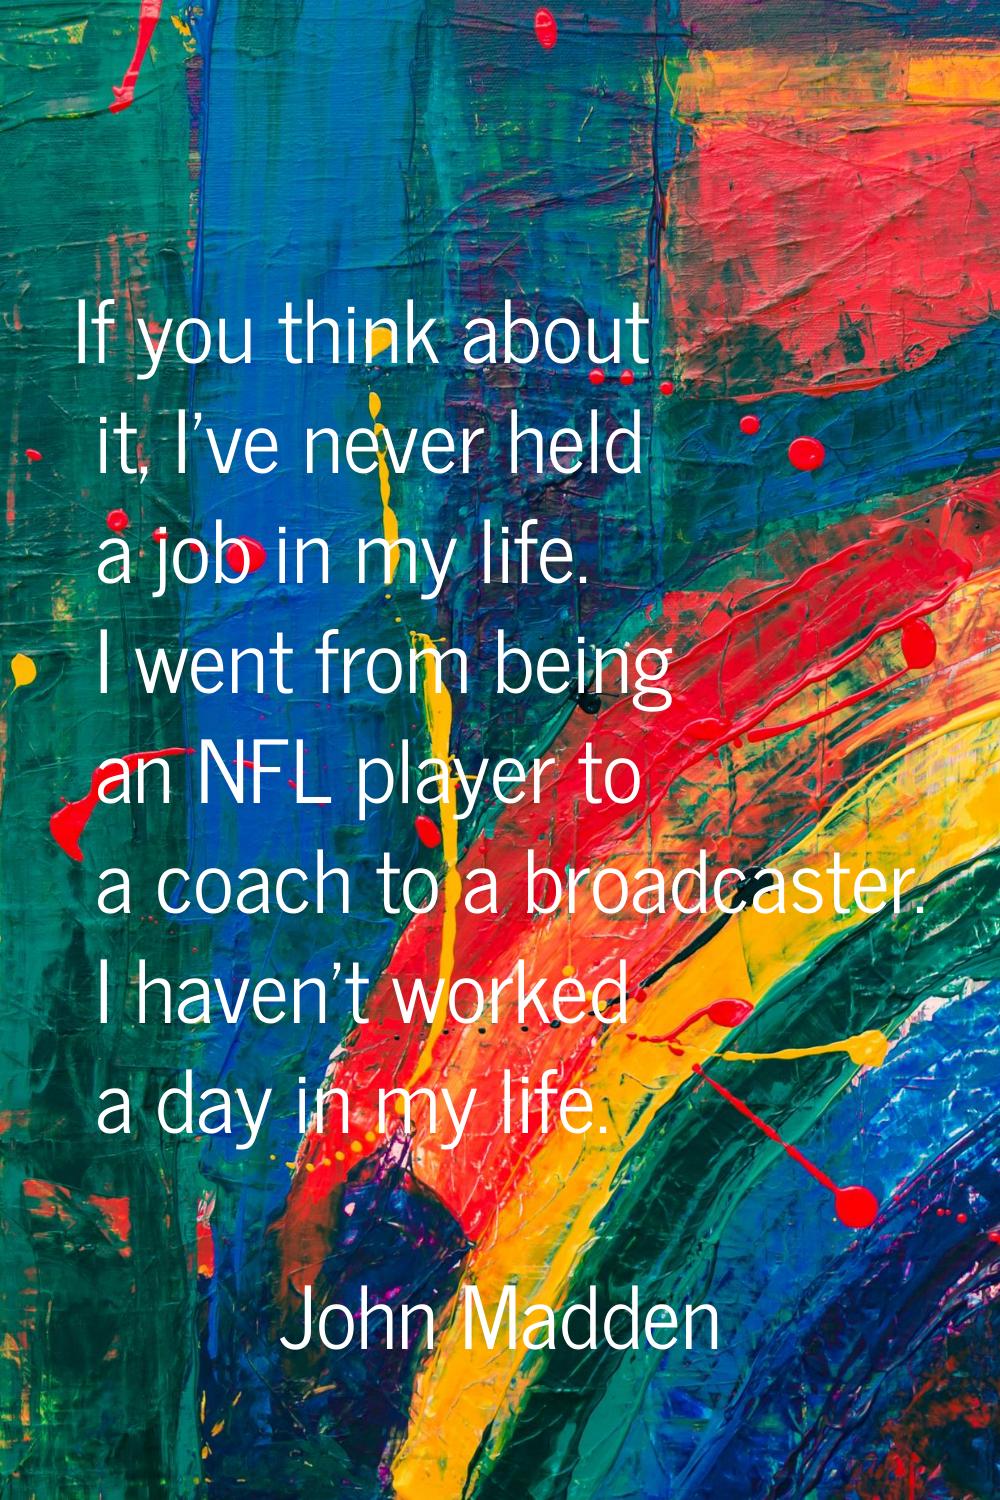 If you think about it, I've never held a job in my life. I went from being an NFL player to a coach